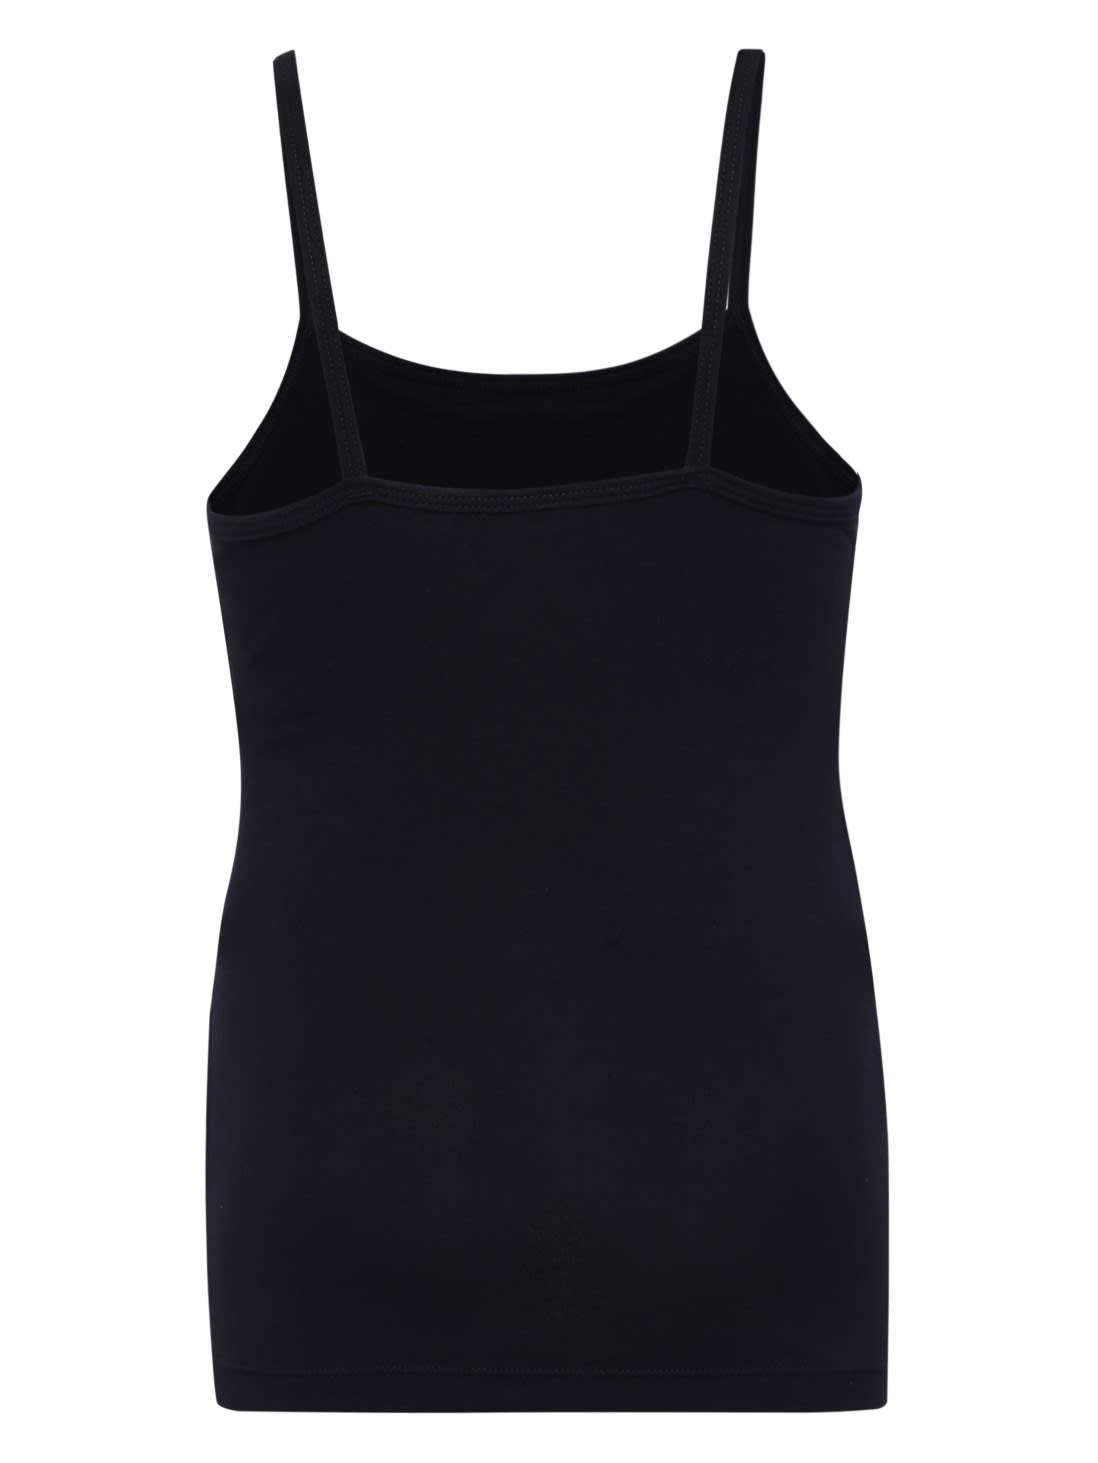 Buy Black Camisole for Girls with Fabric Spaghetti Straps for Girls ...